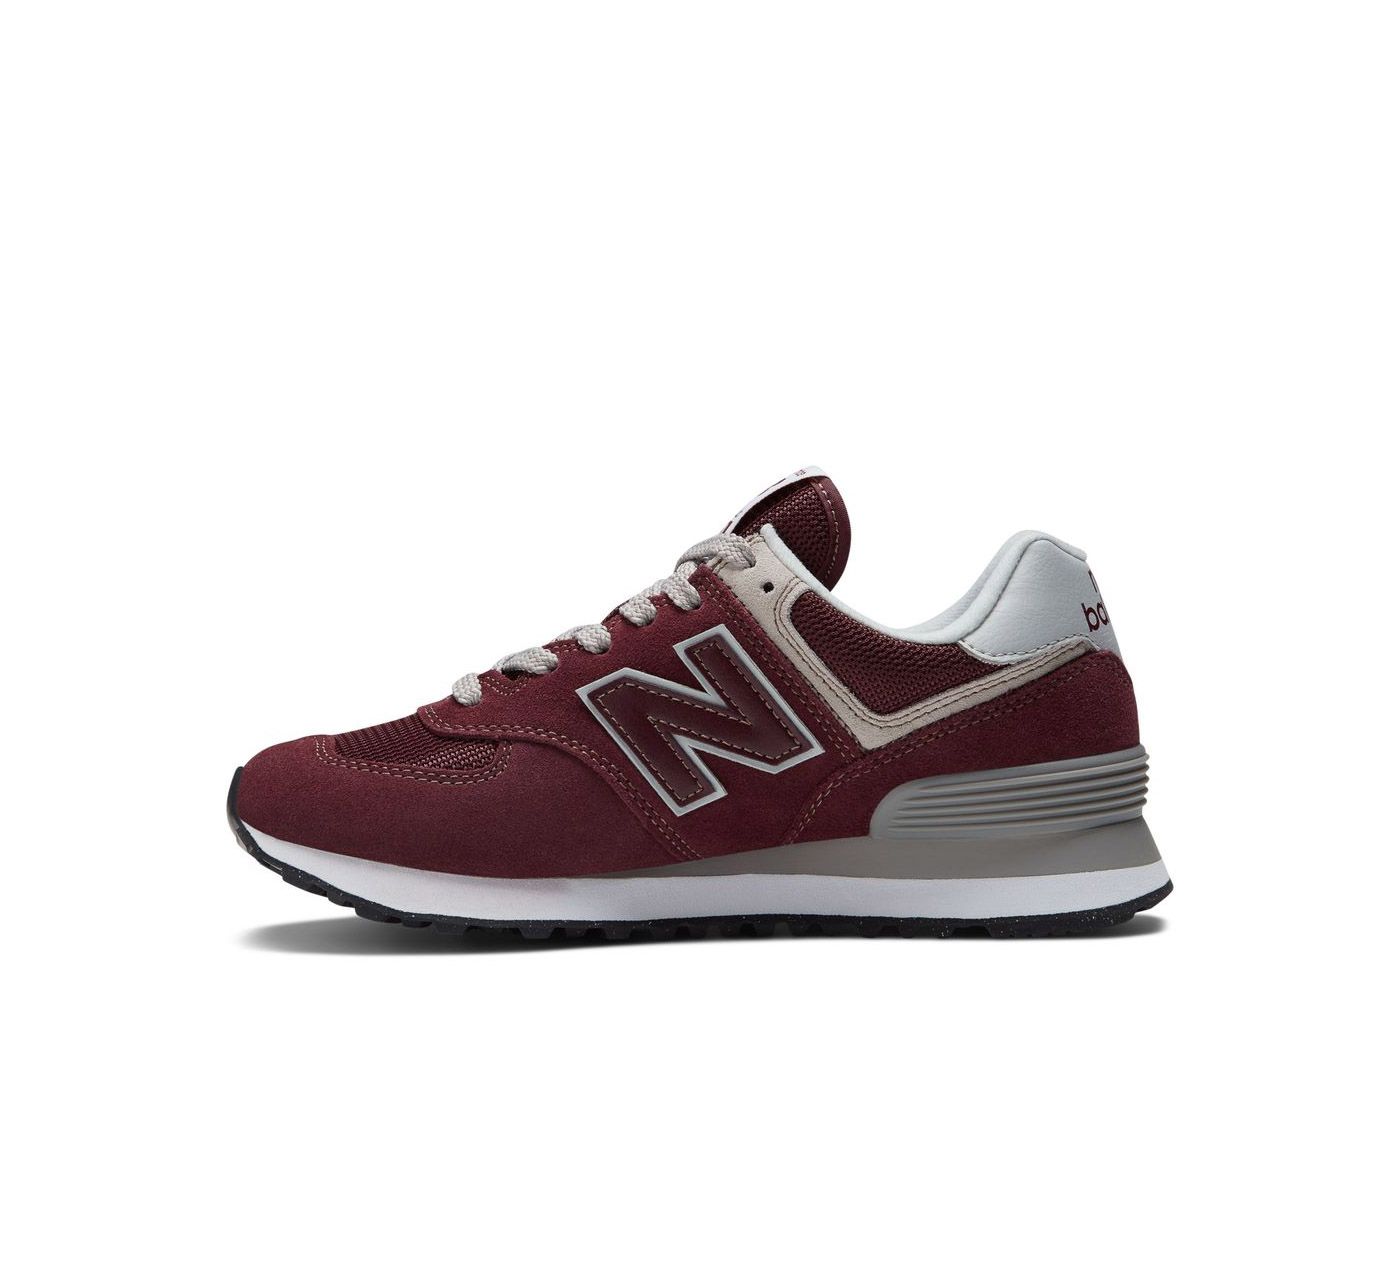 New Balance 574 core trainers in red